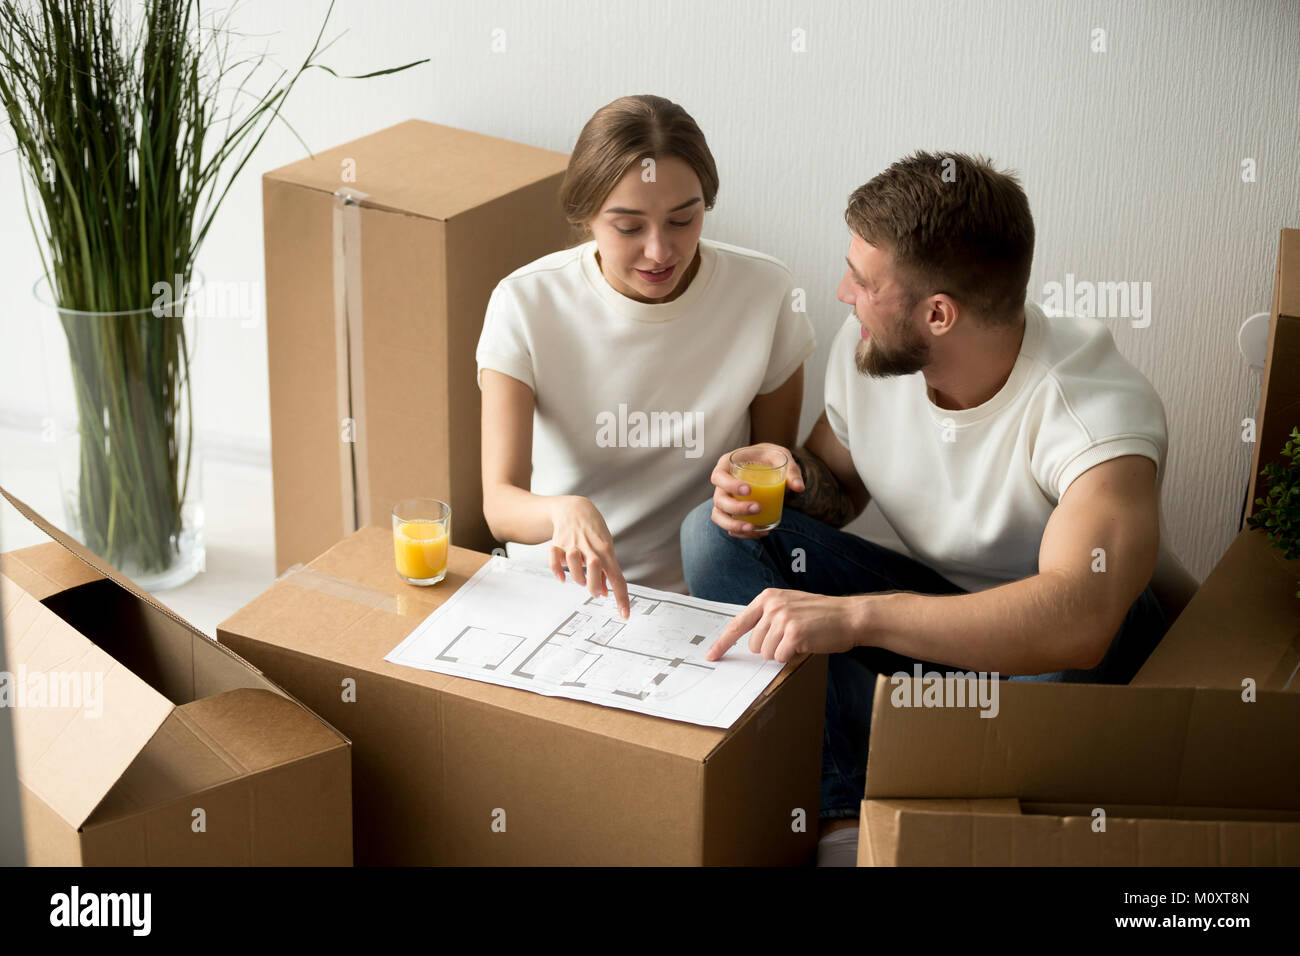 Couple agreeing on home interior design with house plan together Stock Photo